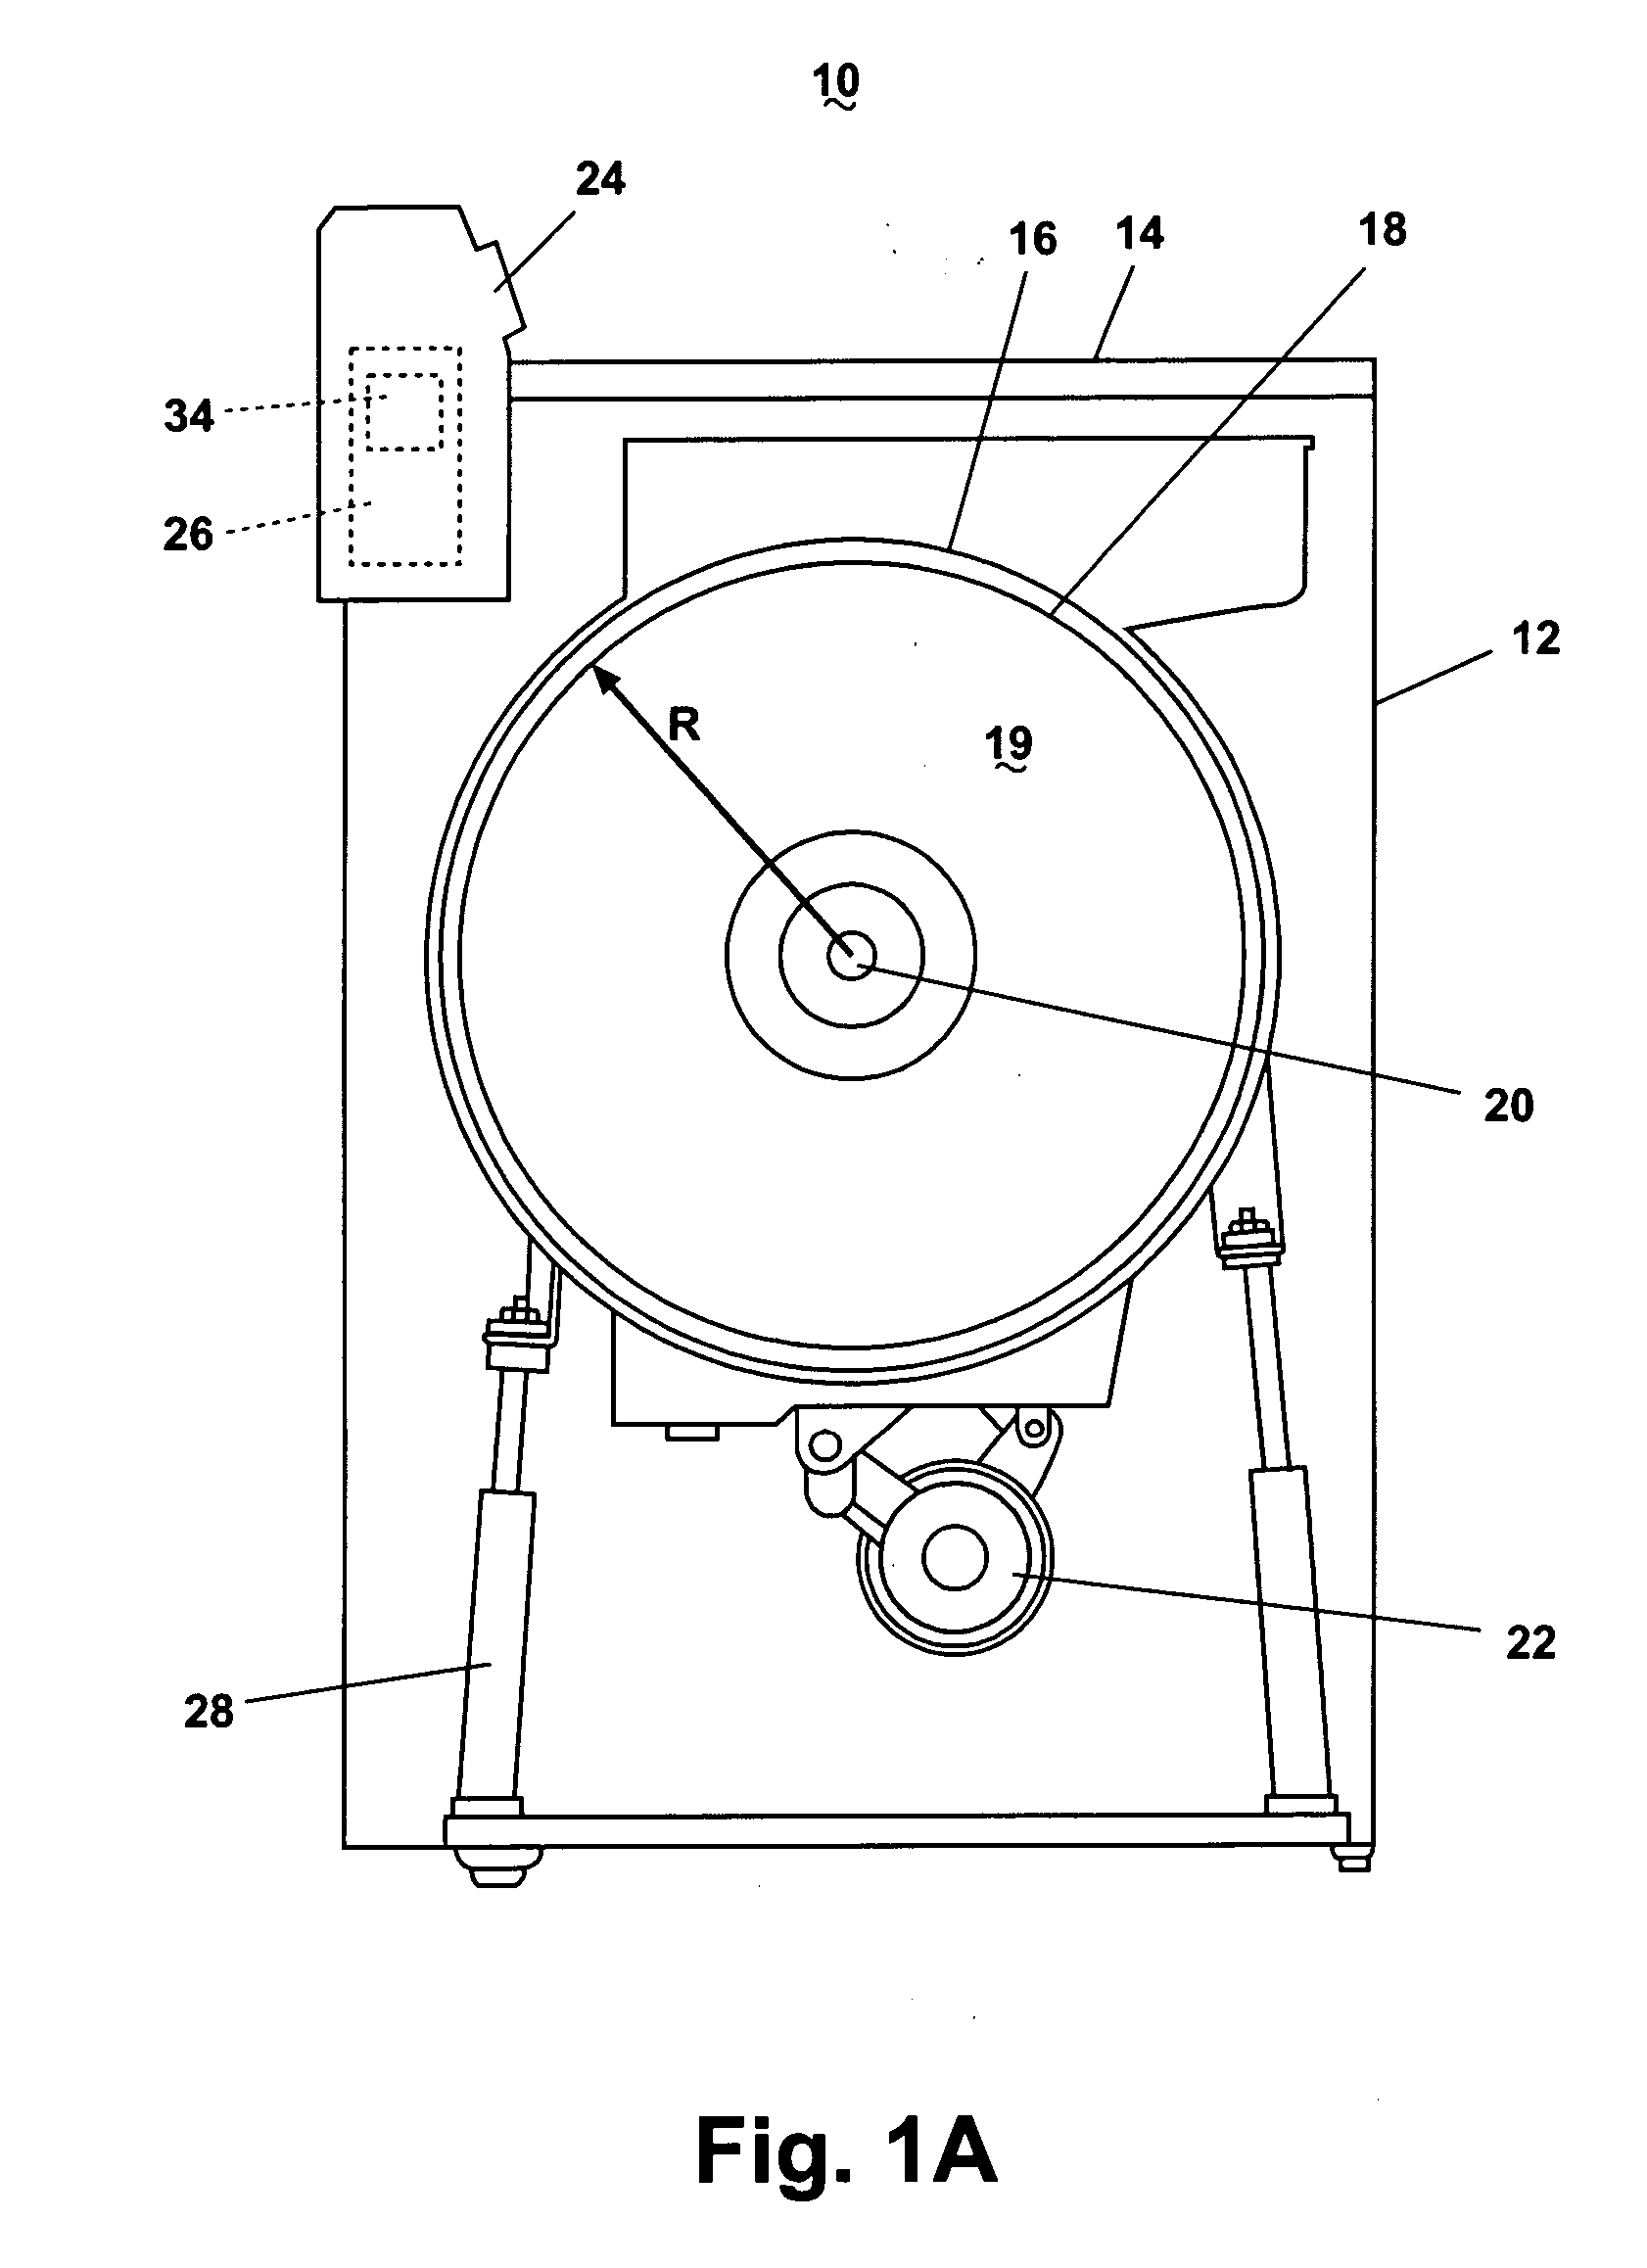 Method for controlling a spin cycle in a washing machine